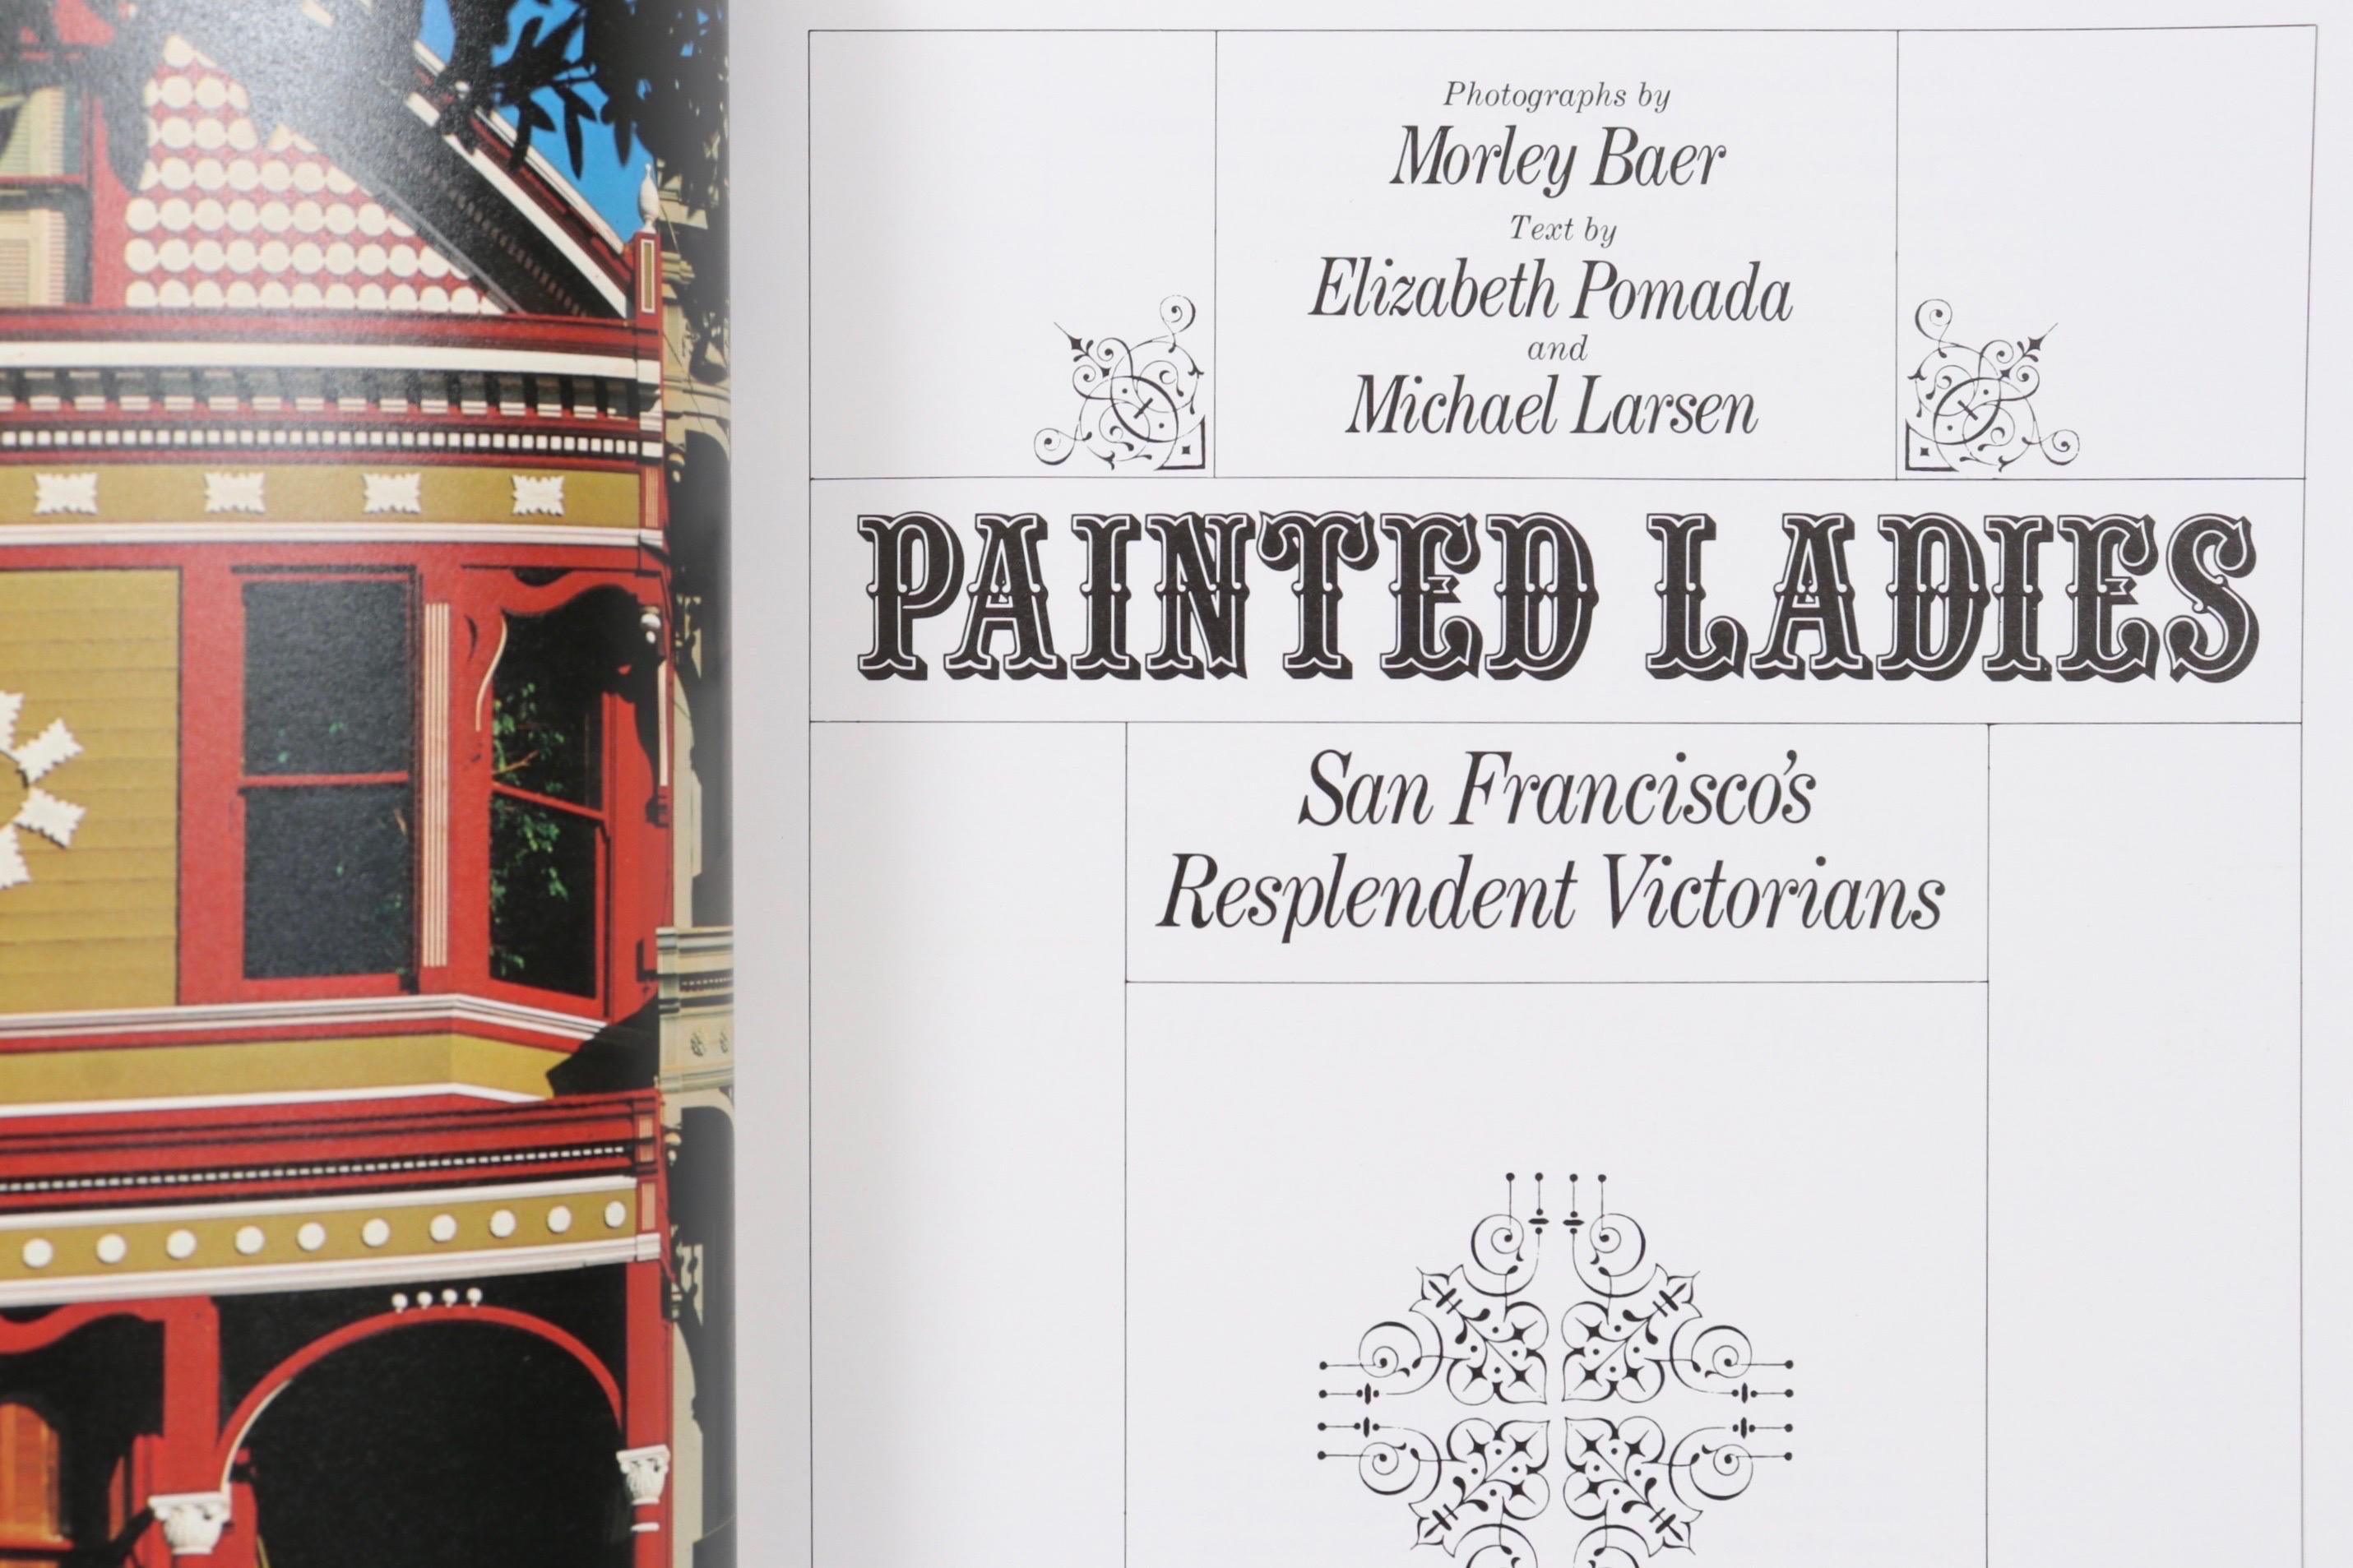 Painted Ladies, San Francisco's Resplendent Victorians. Photographs by Morley Baer, text by Elizabeth Pomada and Michael Larson. Published by E.P. Dutton of New York in 1978, printed in Tokyo. Softcover, 80 pages.